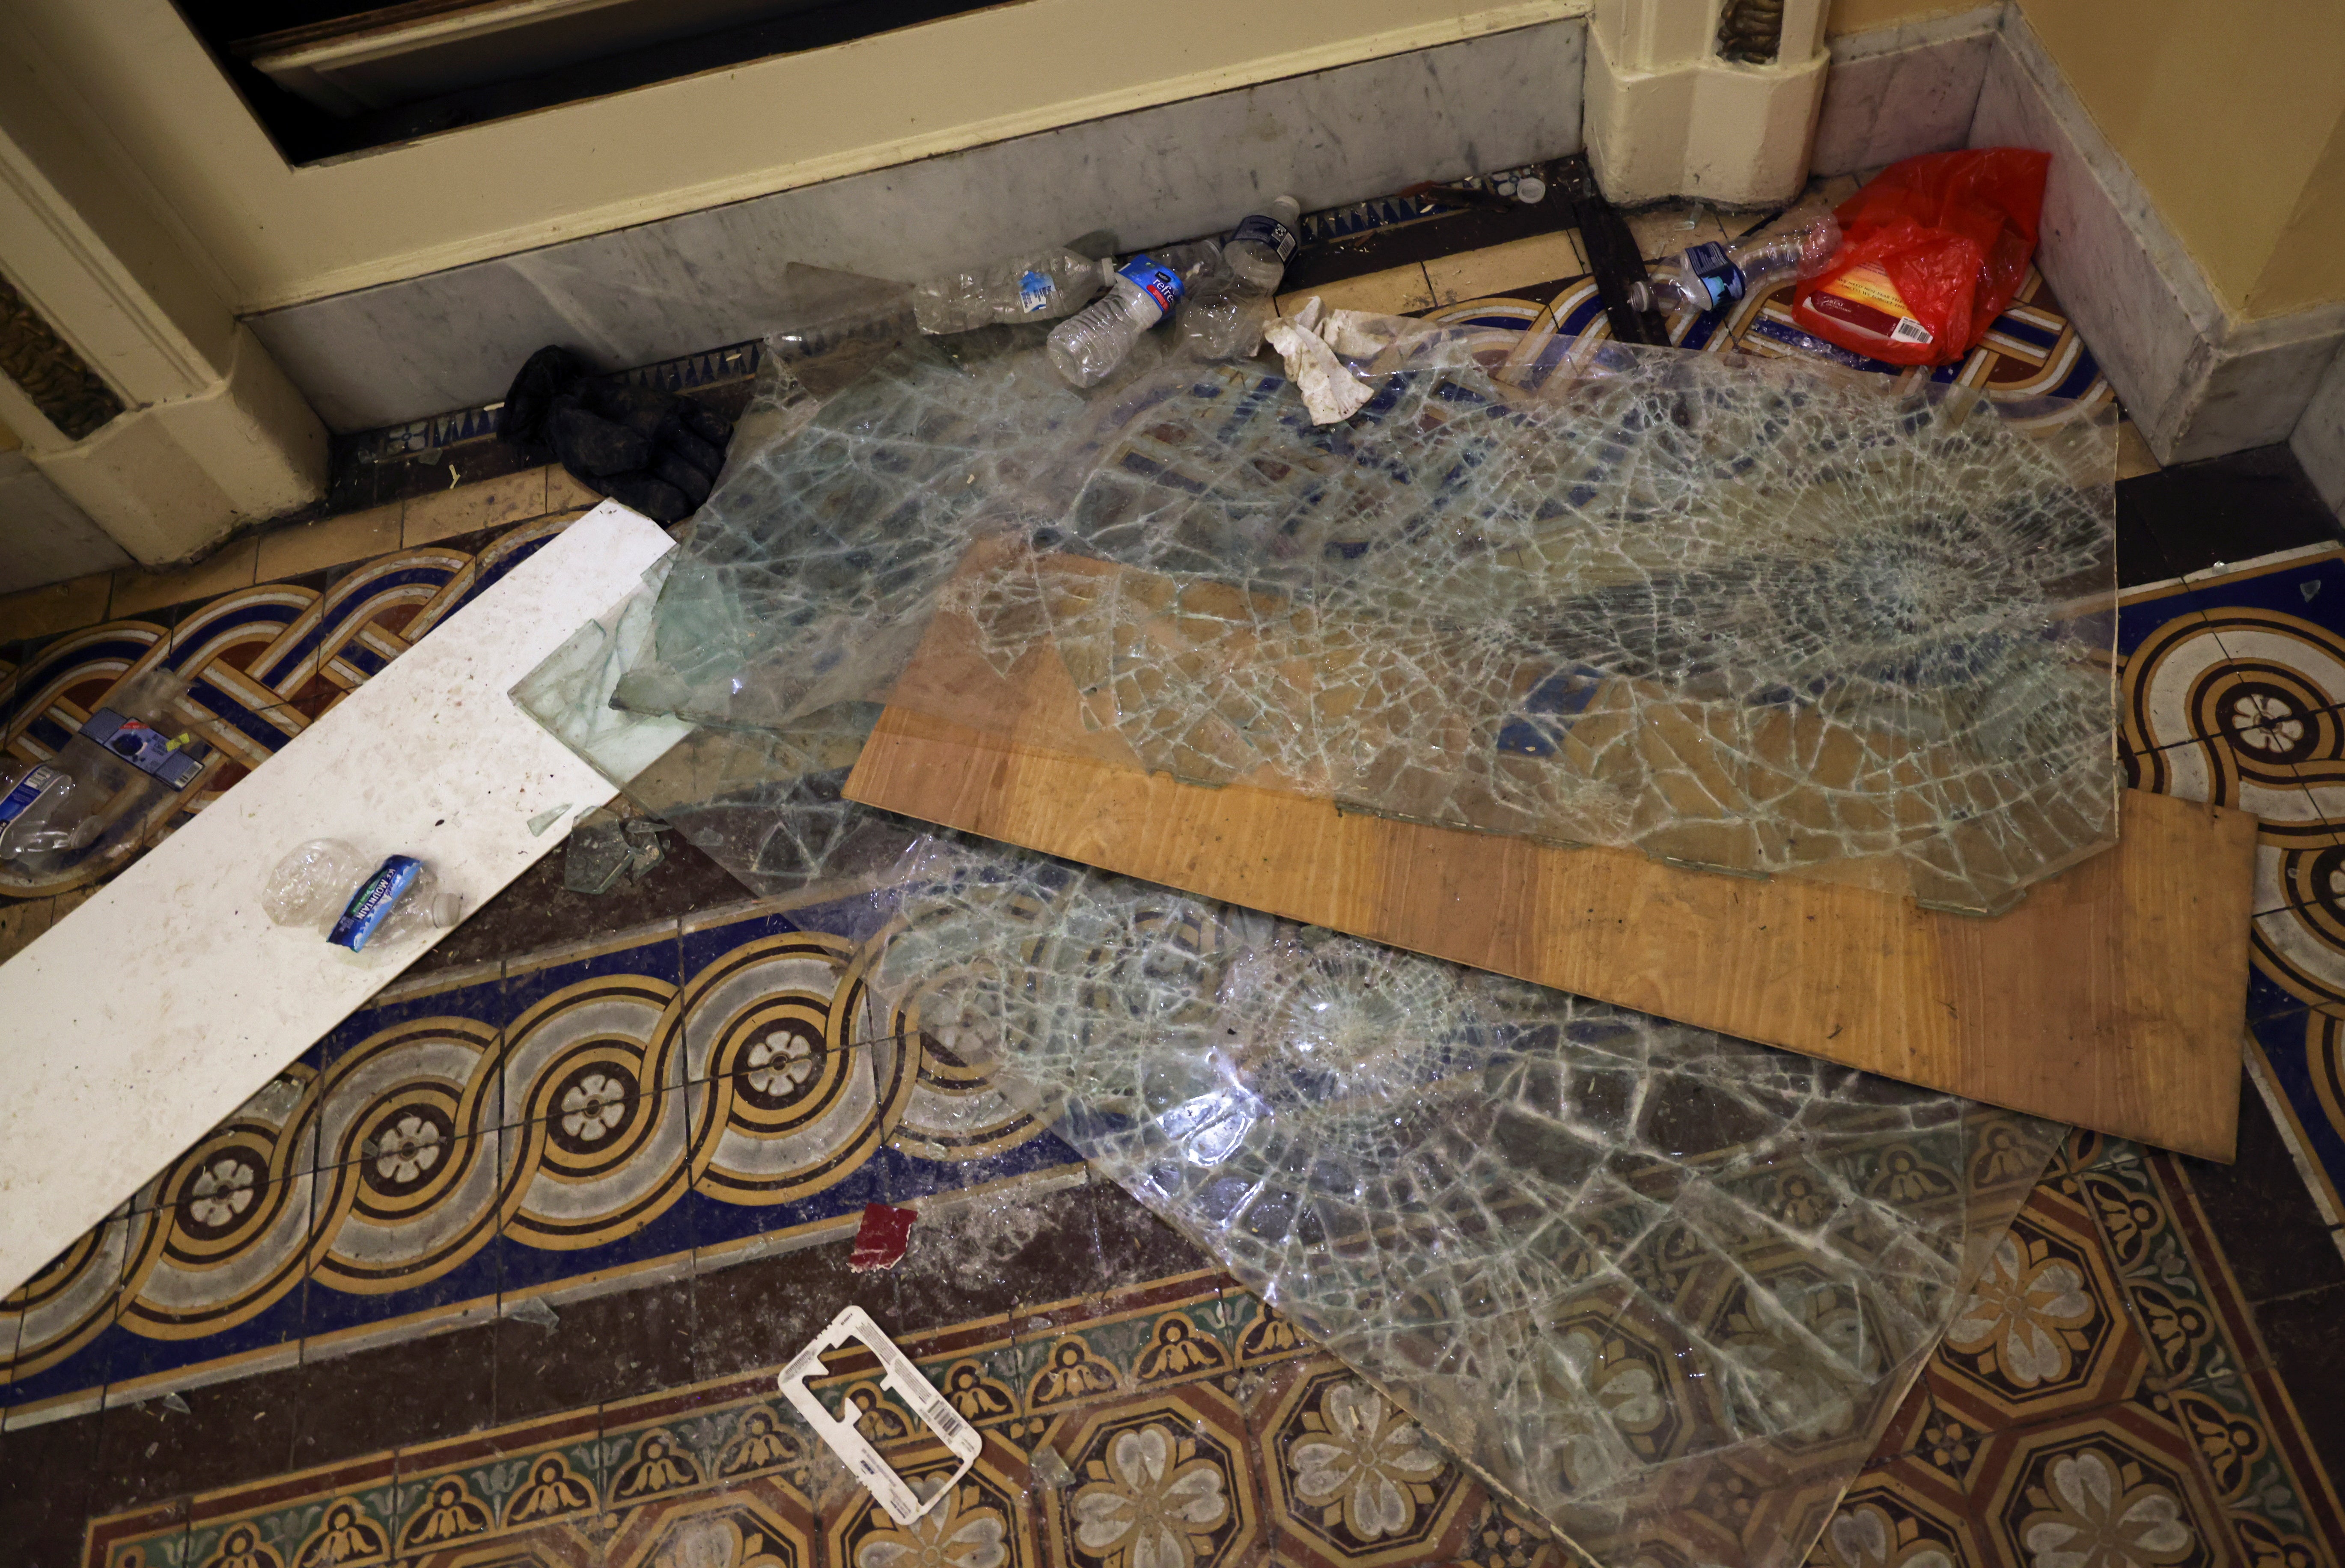 Shattered glass, broken furniture and flags scatter cross the floor were picture in the aftermath of the riots&nbsp;